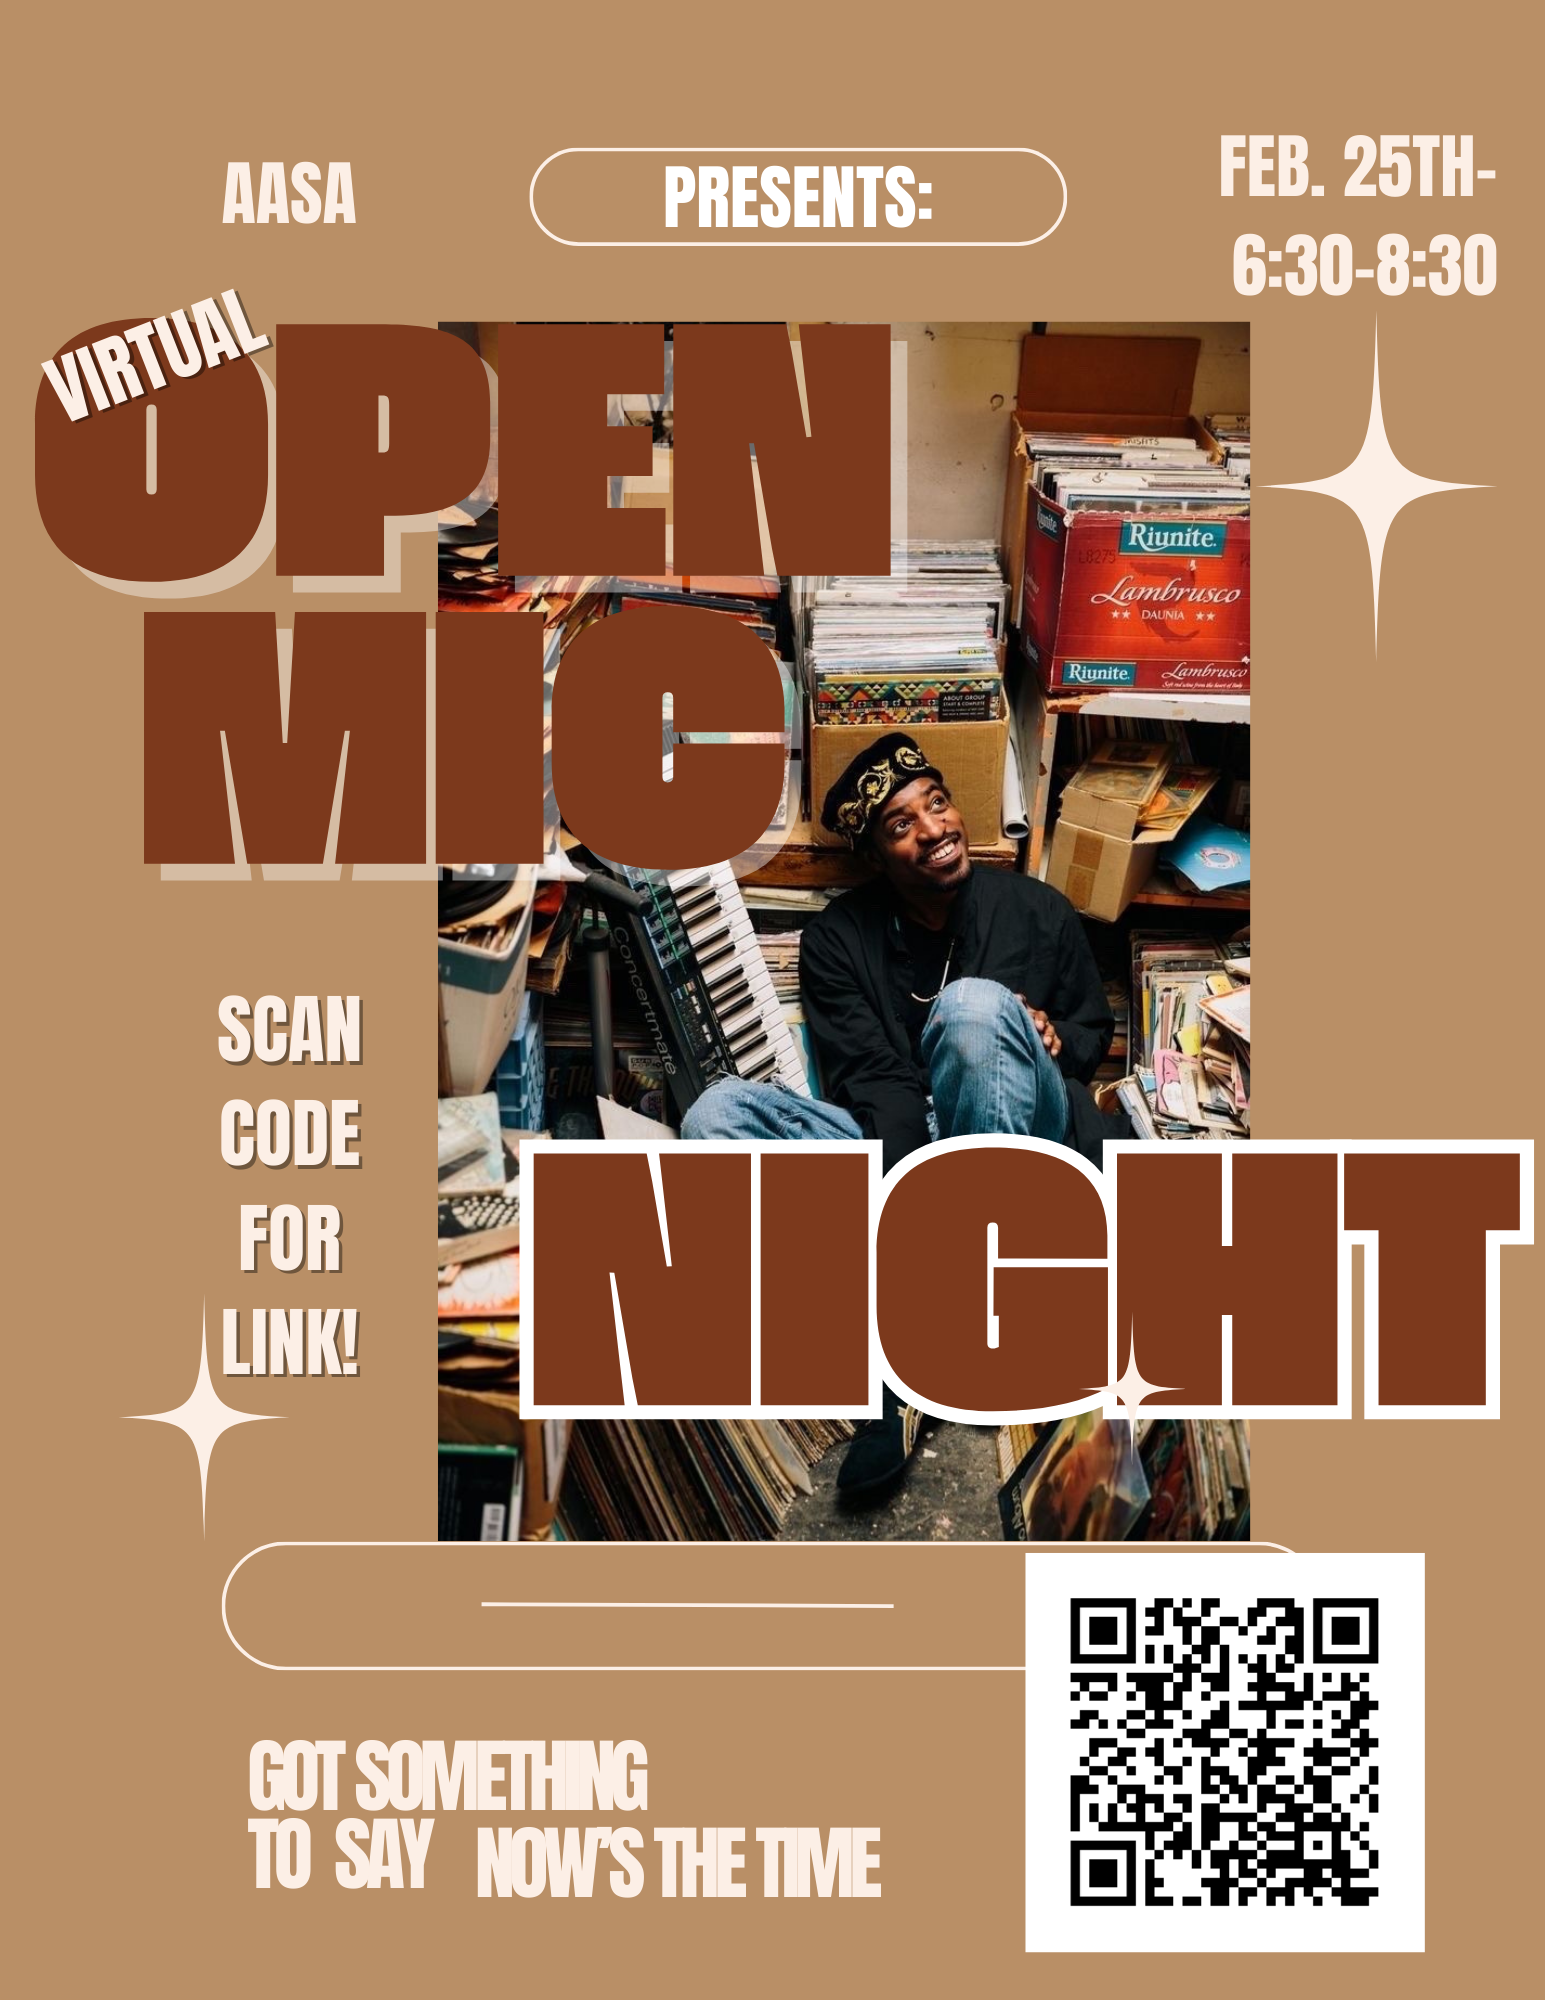 USCB AASA Presents Poetry Night. Virtual Open Mic - write your own work that reflects any part of black history!. Friday Feb 25, 6:30 - 8:30 Scan code for link. Got something to say? Now's the time.